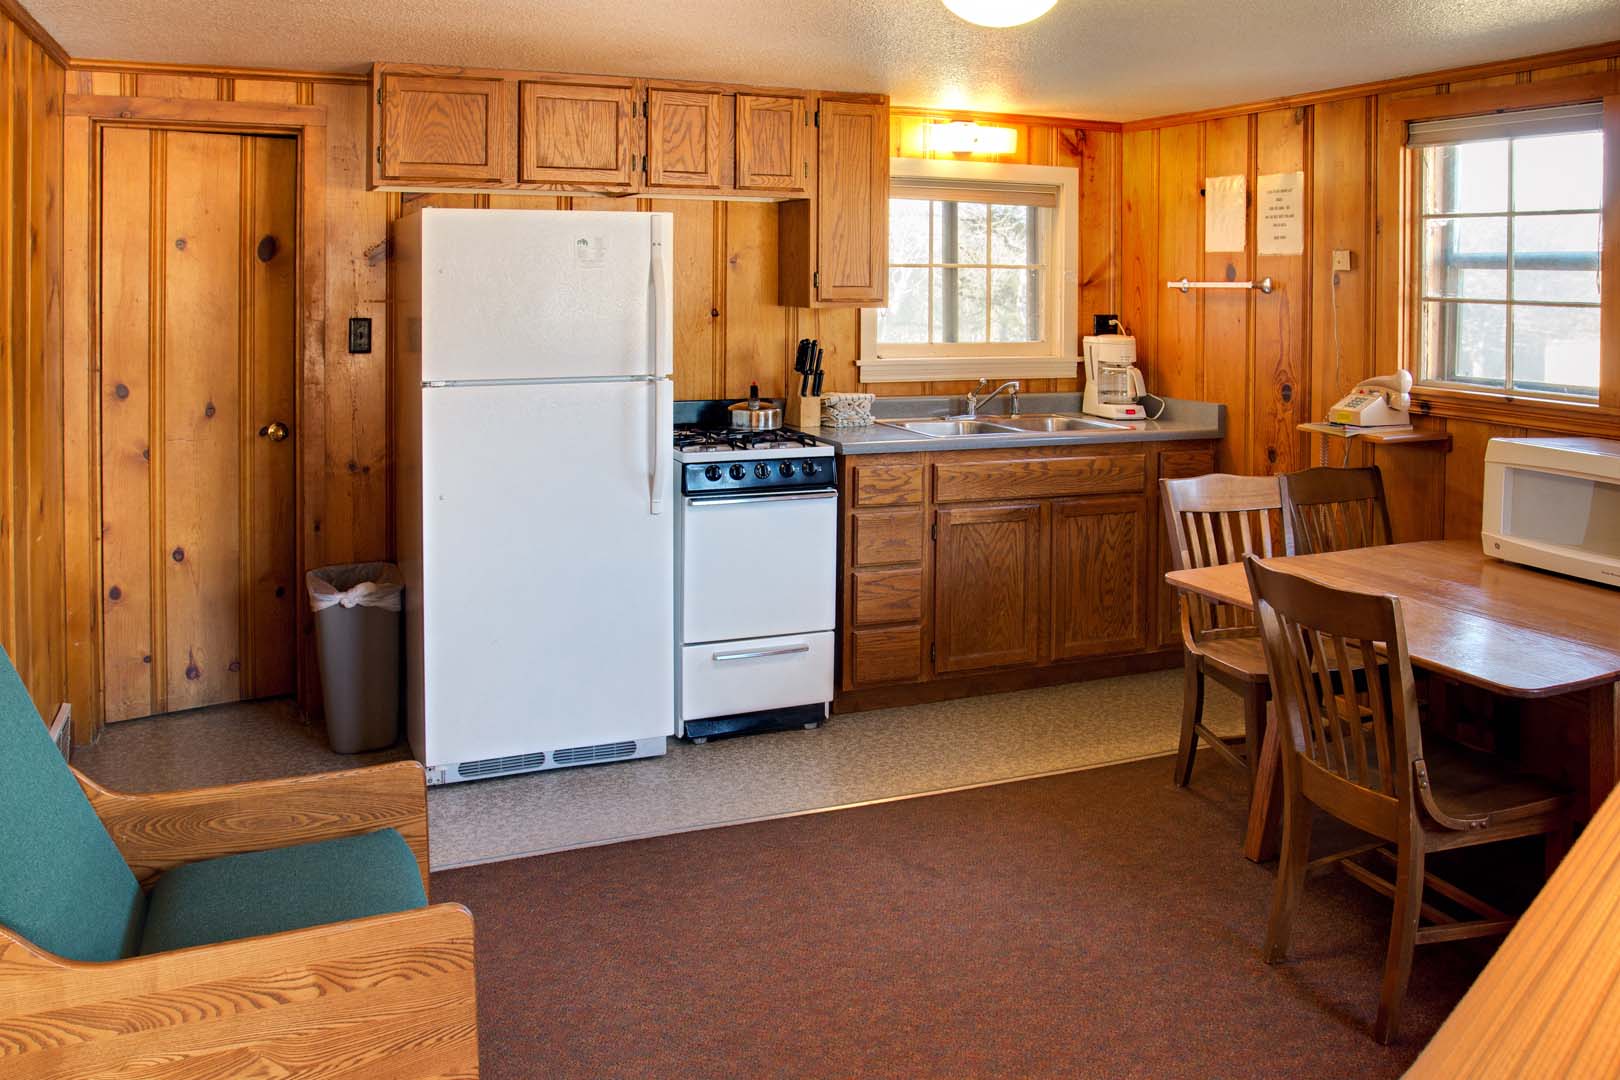 Kitchen inside cabin with kitchen table and chairs